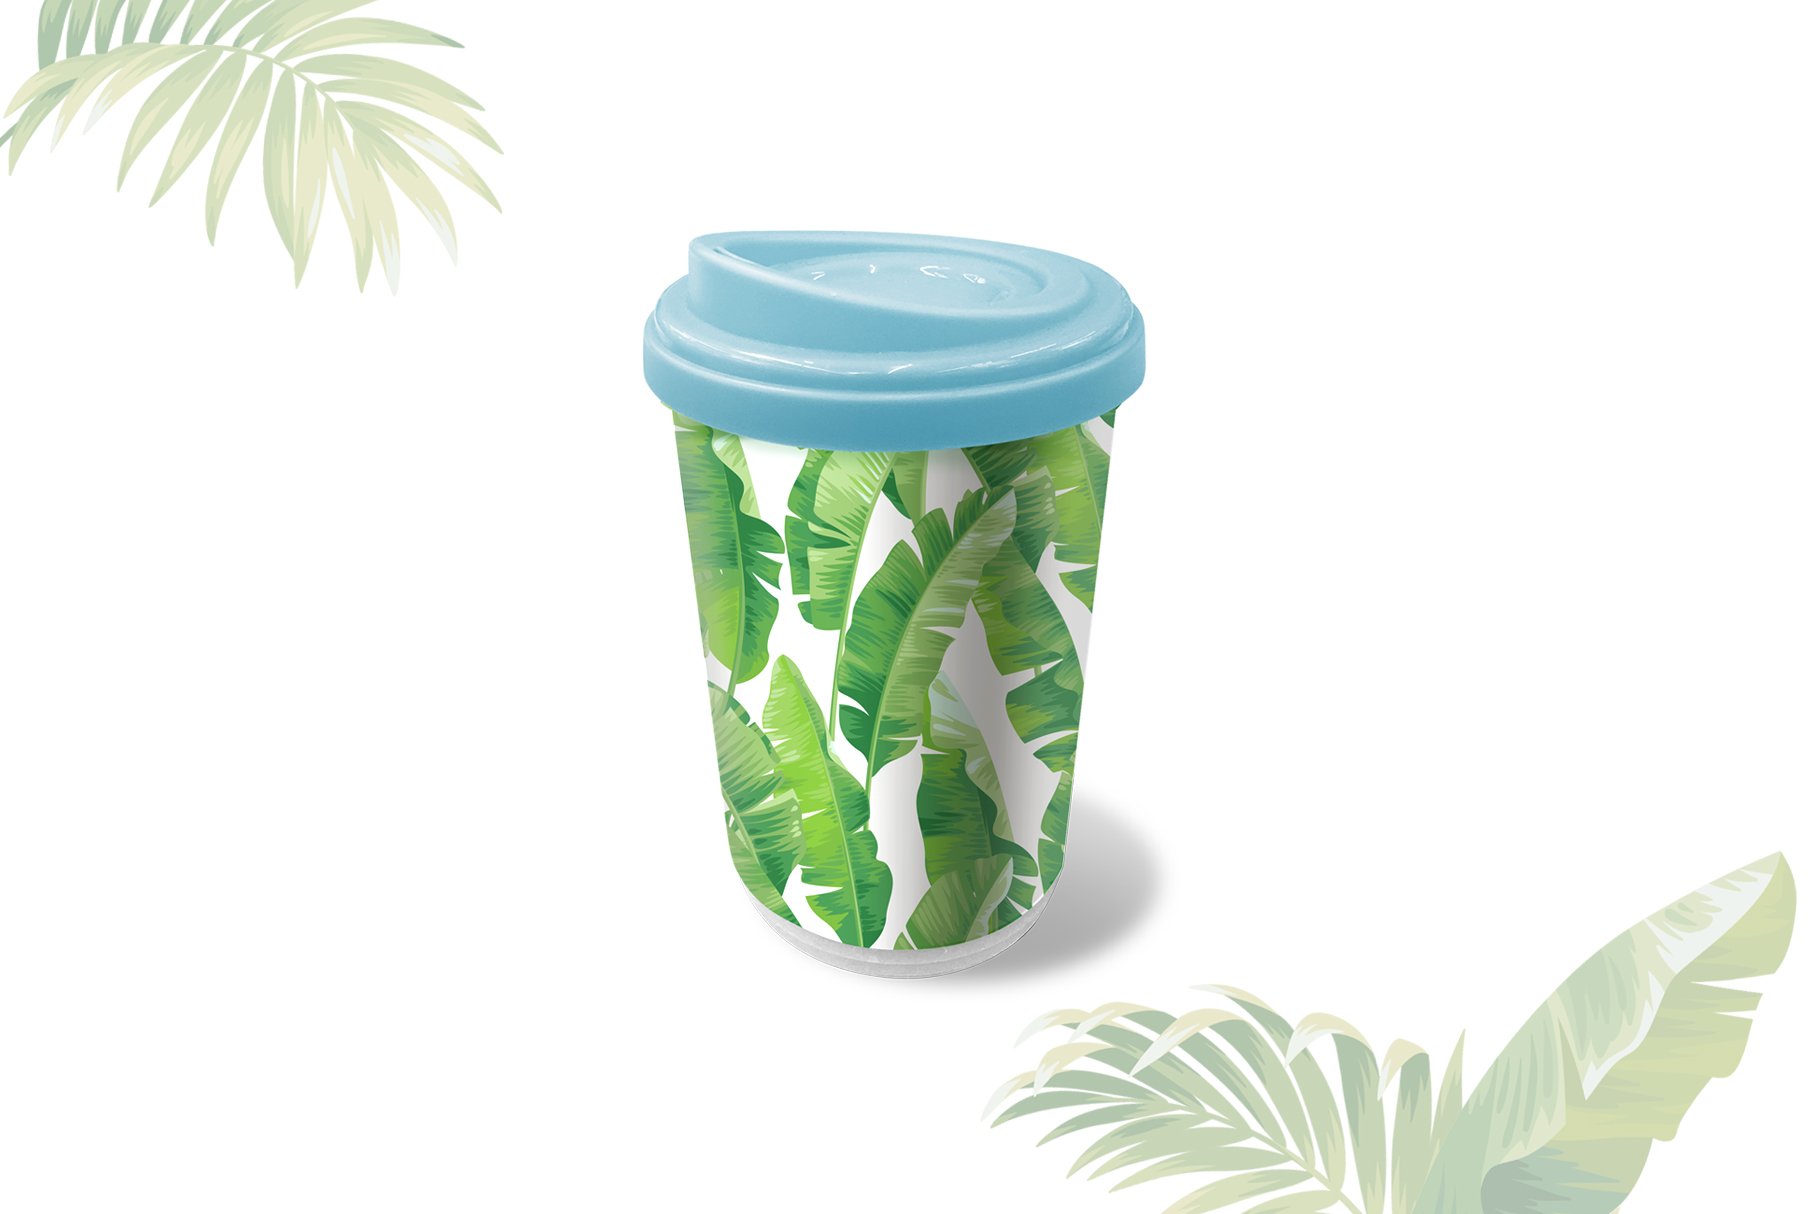 Cup with a blue lid and some green leaves.